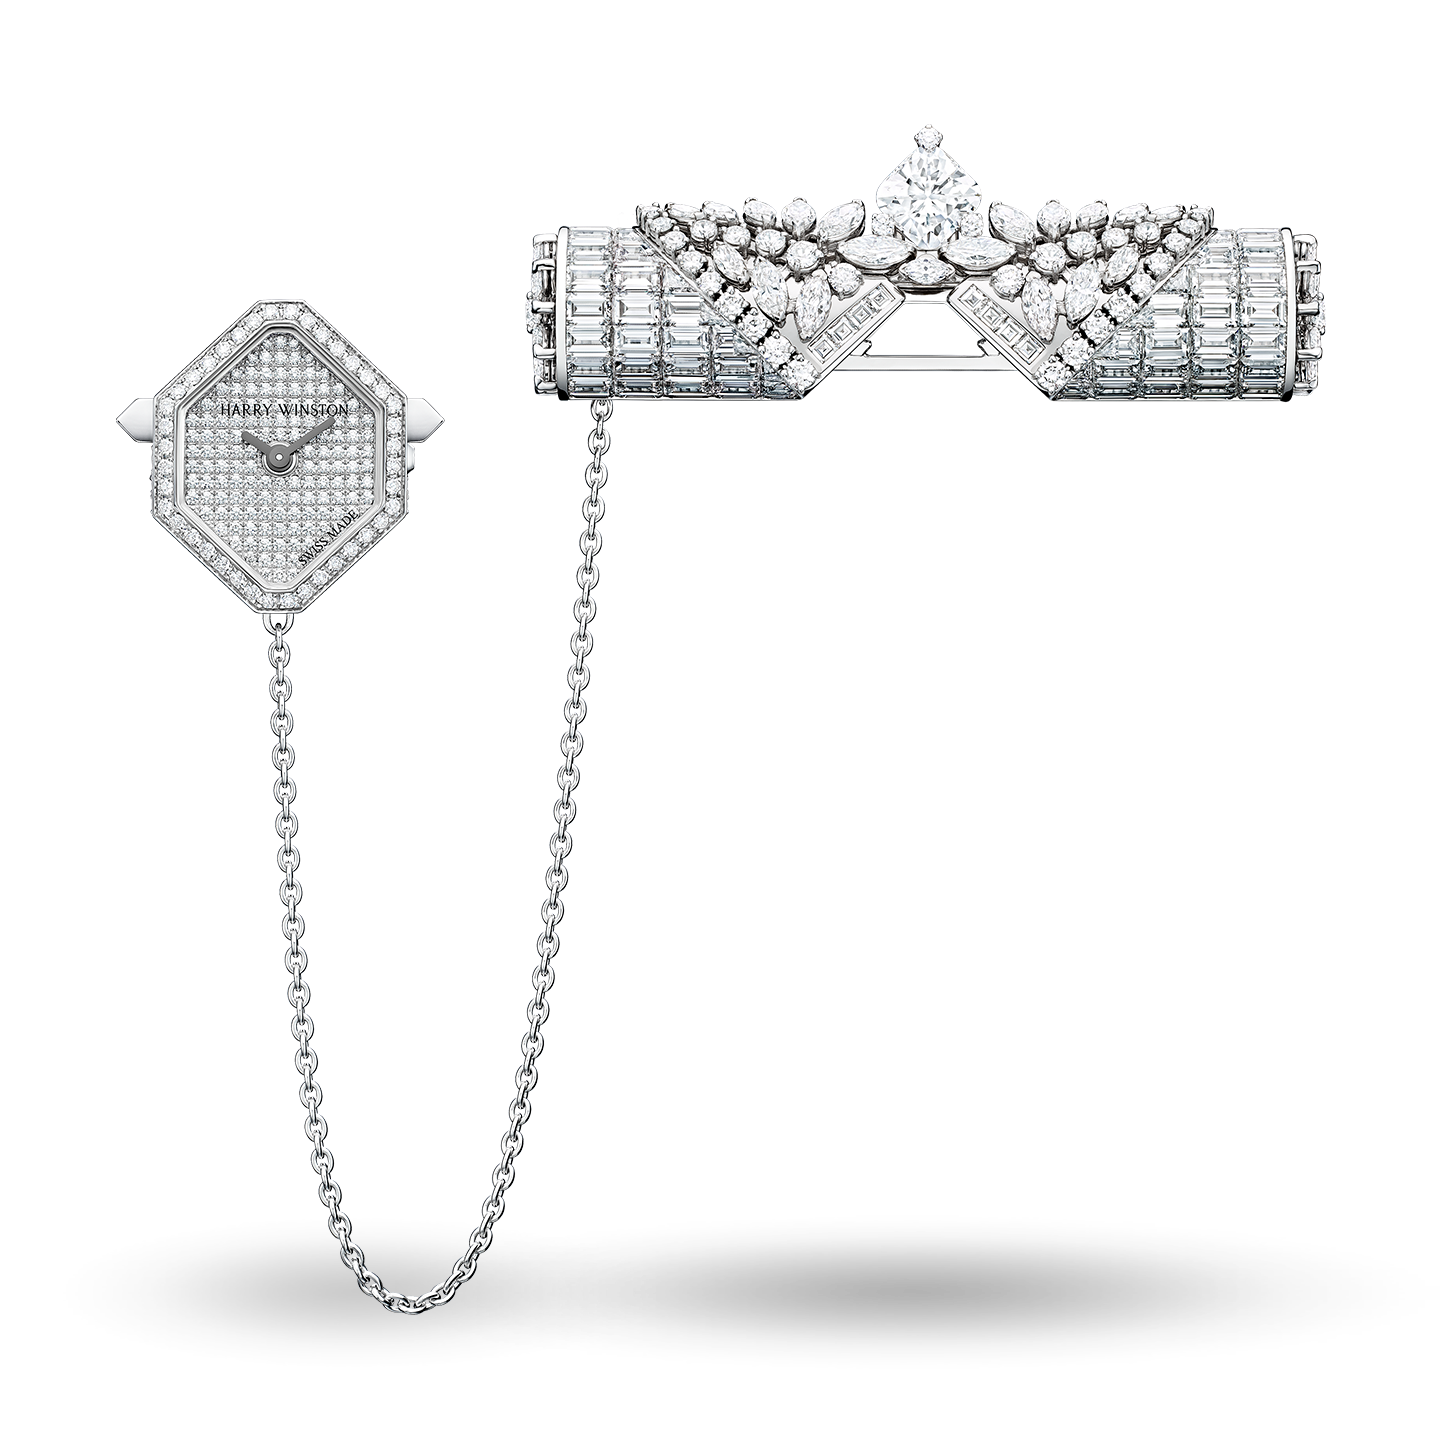 My Precious Time by Harry Winston, product image 1